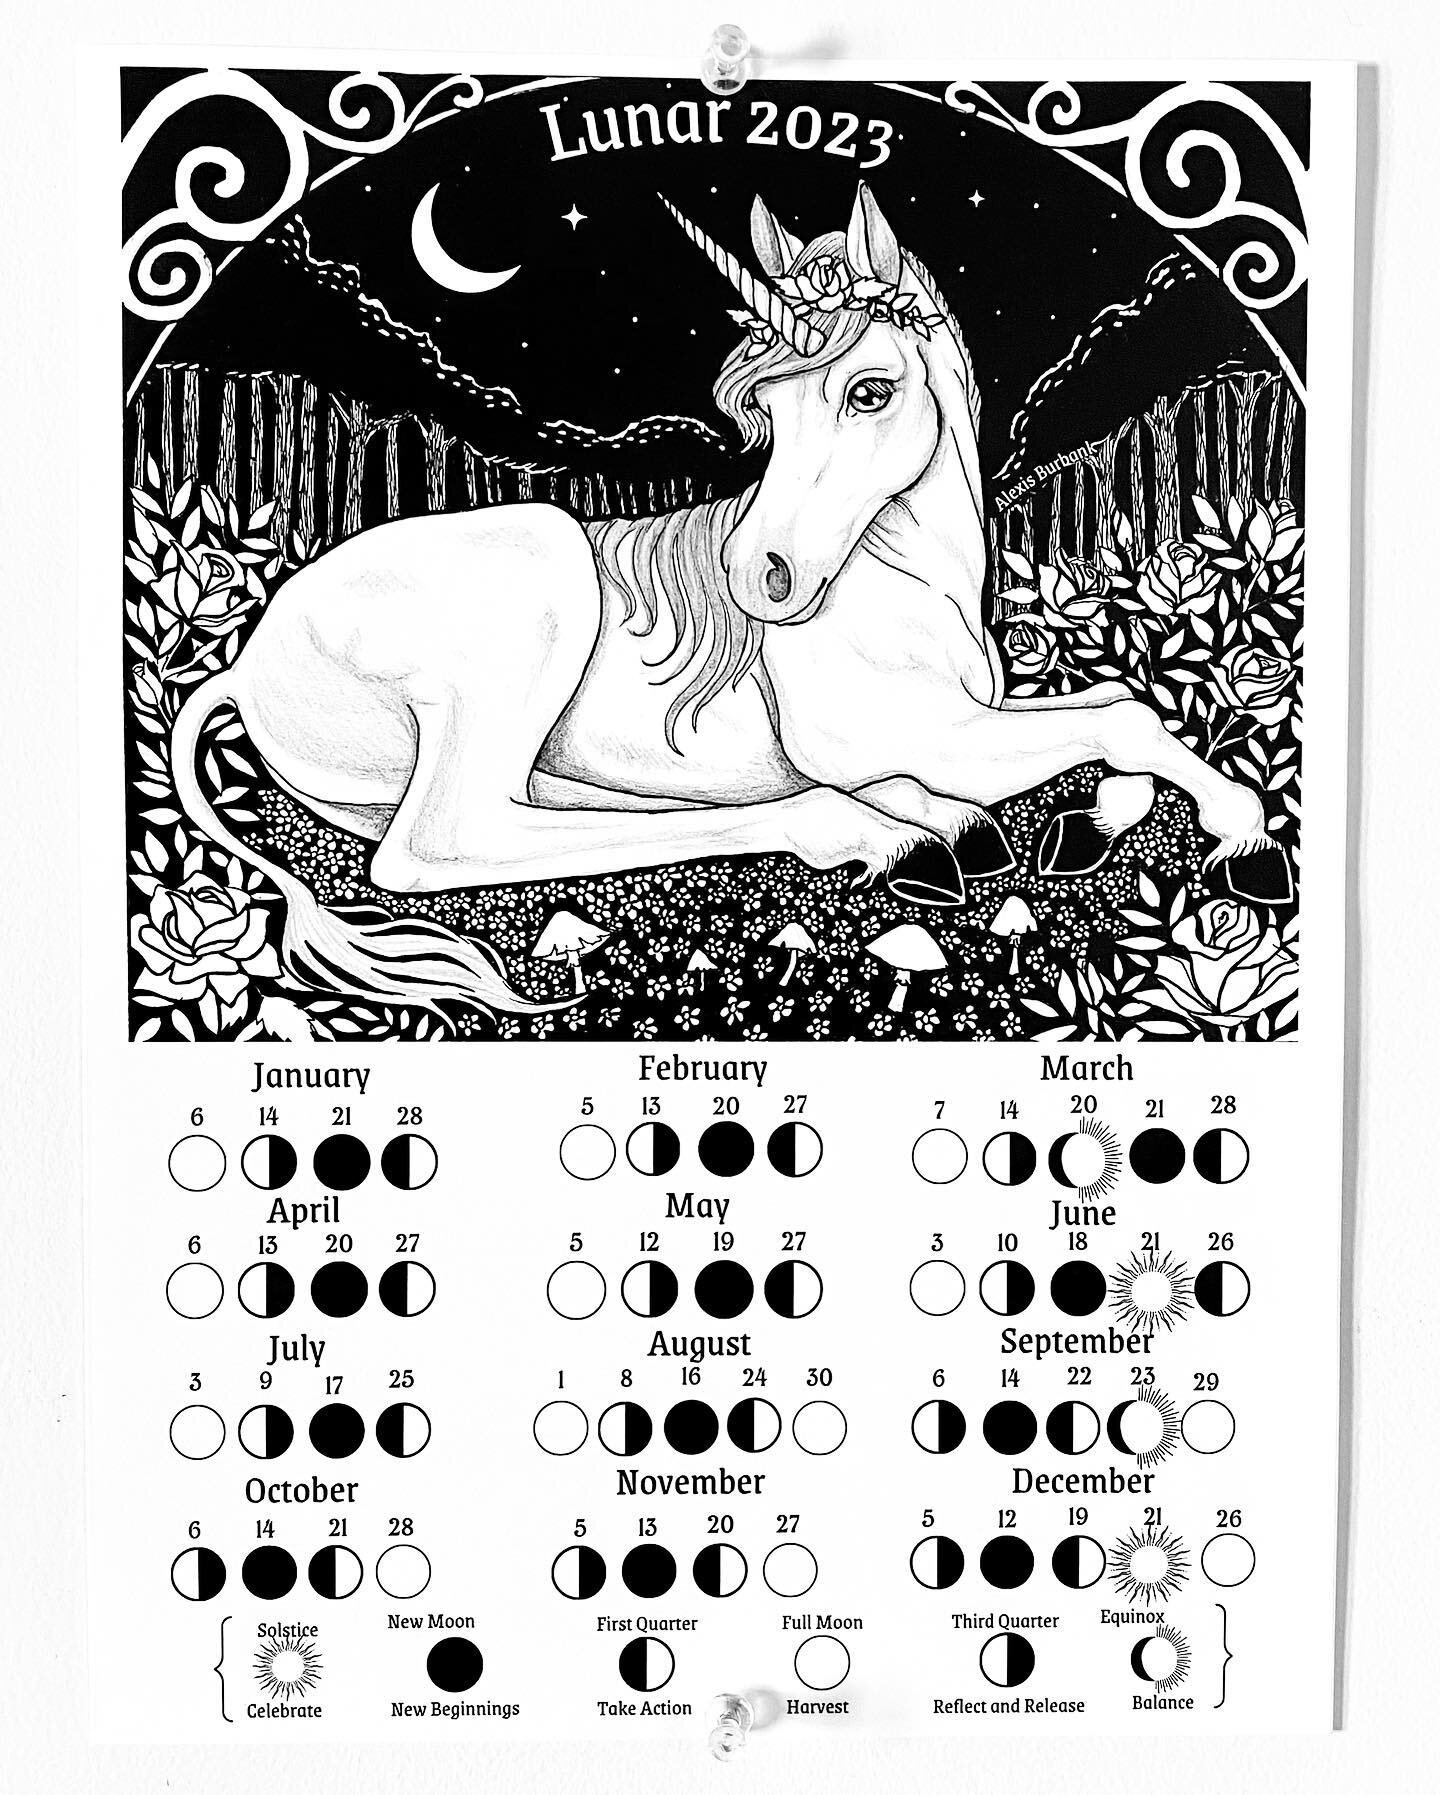 2023 Lunar Calendars hot off the press, just in time for the @oddandunusualshow next weekend! For those who cannot make it and would like one, you can order them directly through me or my Etsy shop.

#lunarcalendar #2023 #moonphases #unicorn #crow #r